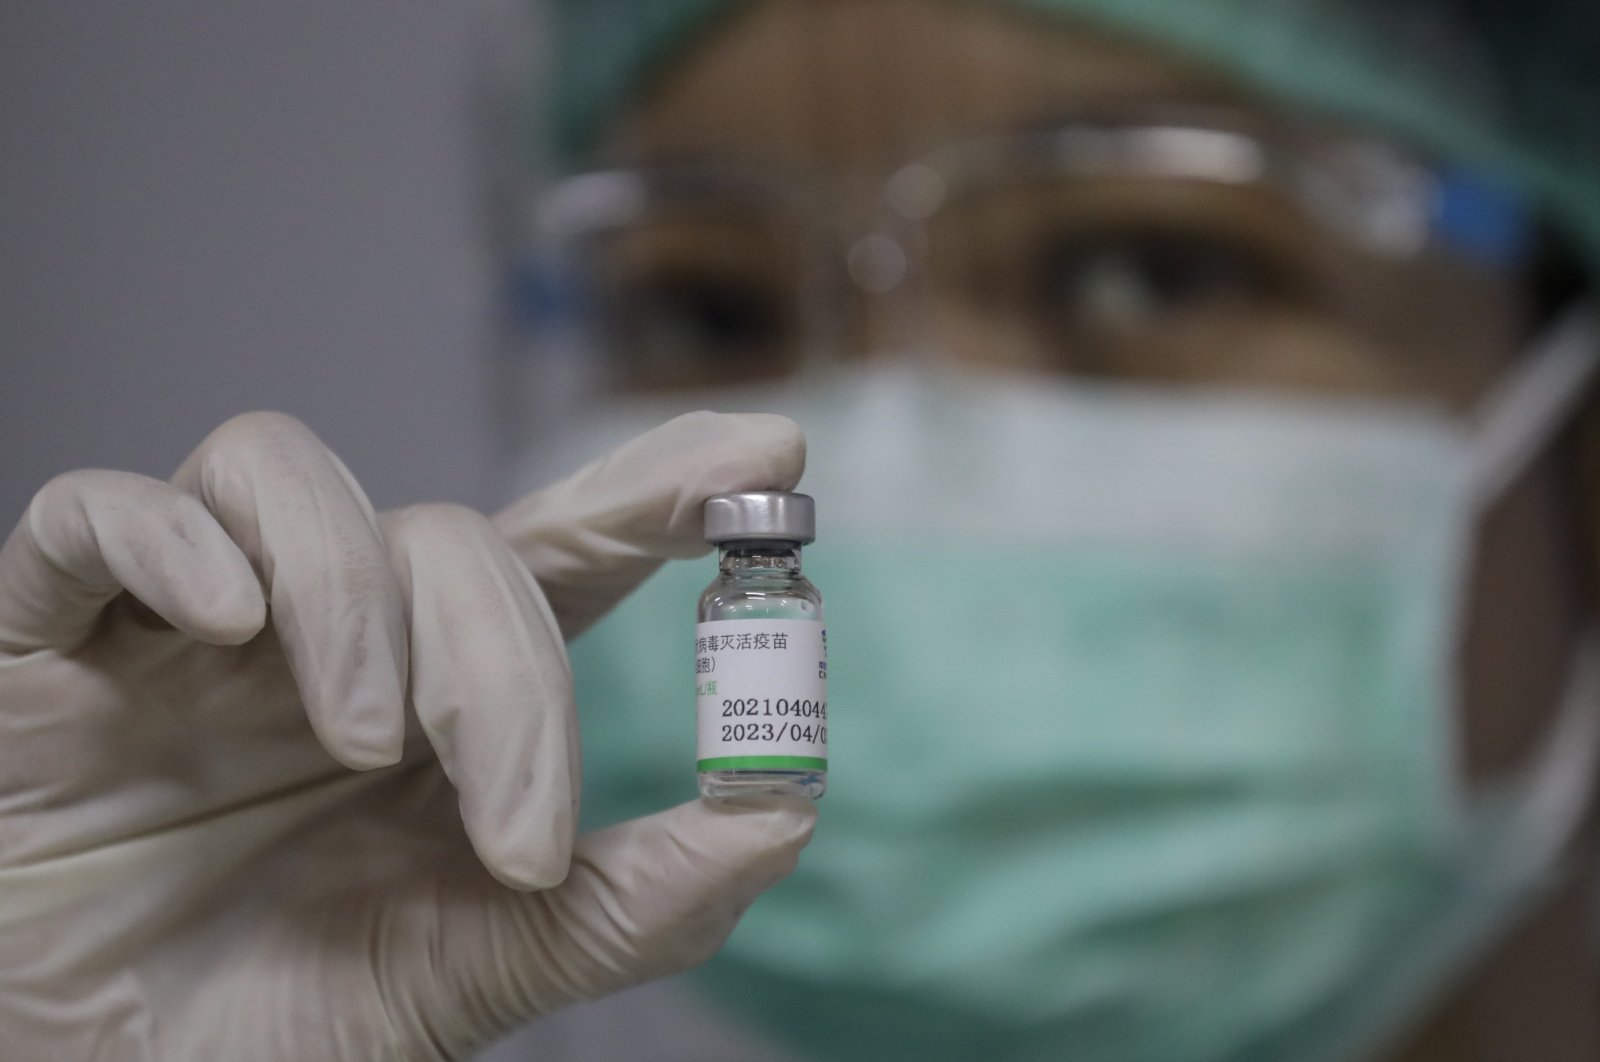 A health care worker shows a Sinopharm COVID-19 vaccine vial during the first day of a private vaccination drive for workers at Indah Kiat Pulp and Paper Company, part of Sinar Mas Group in Tangerang, outskirt of Jakarta, Indonesia, May 18, 2021. (EPA Photo)